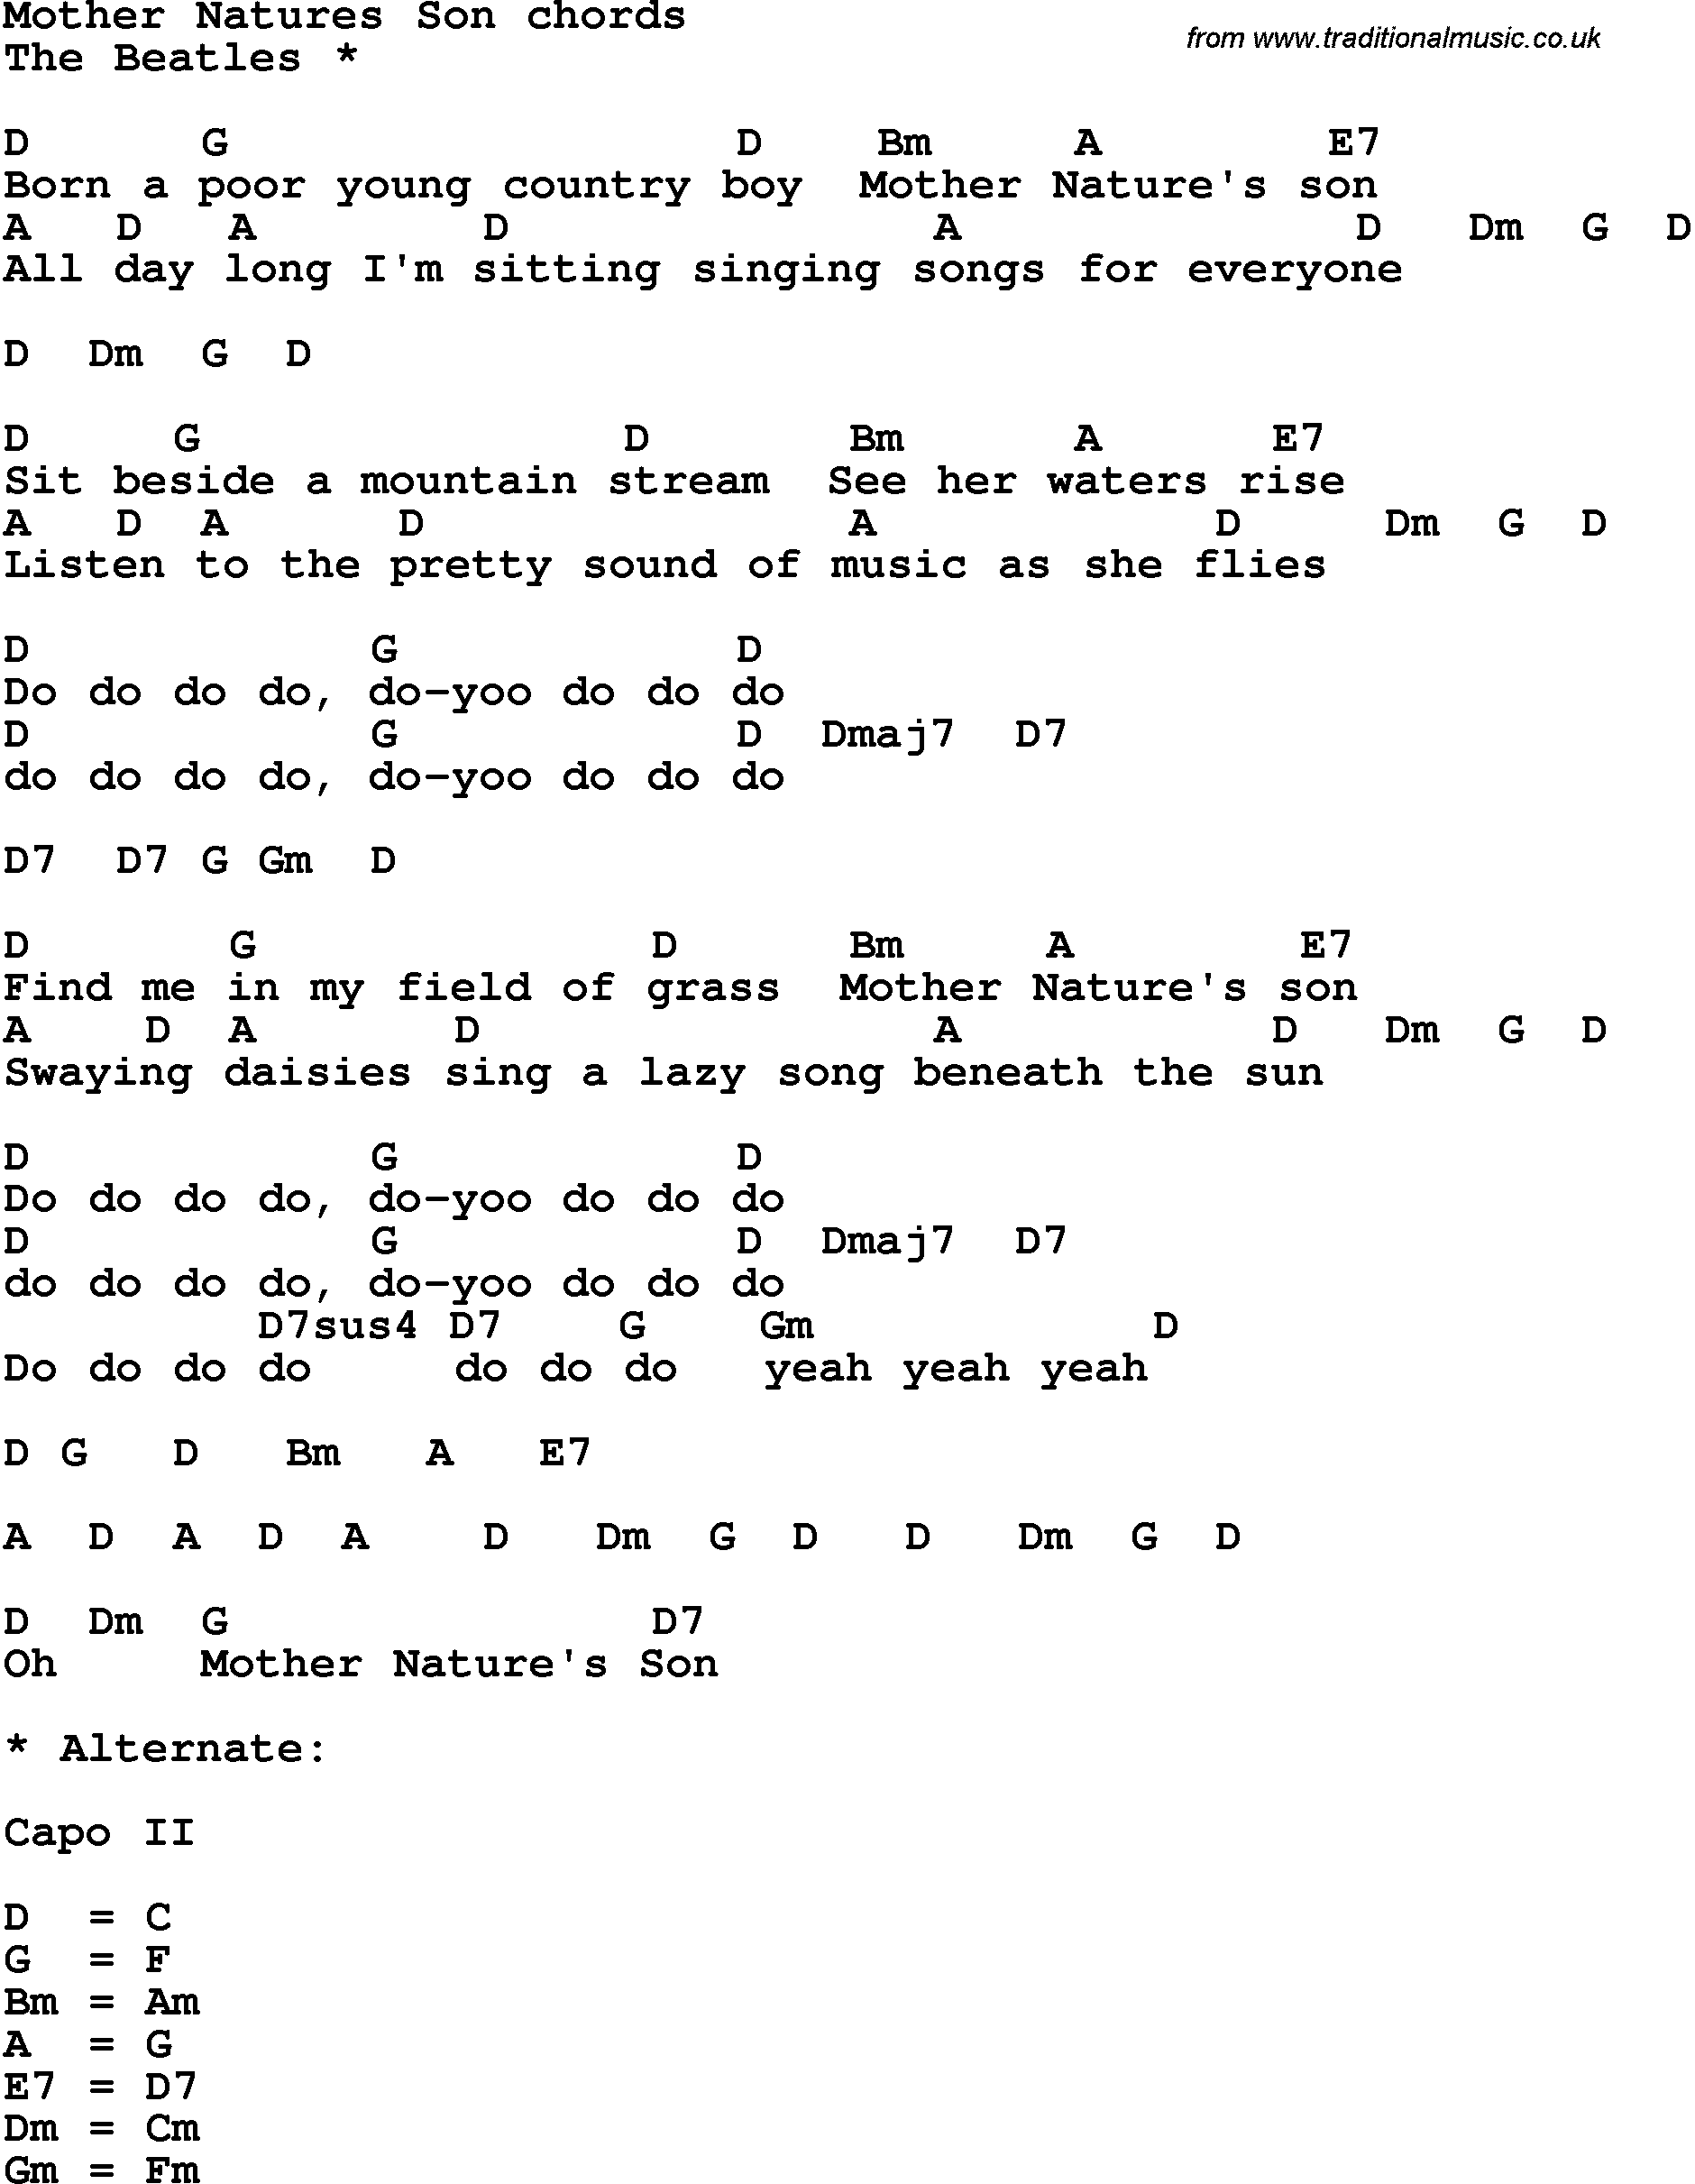 Song Lyrics with guitar chords for Mother Nature's Son